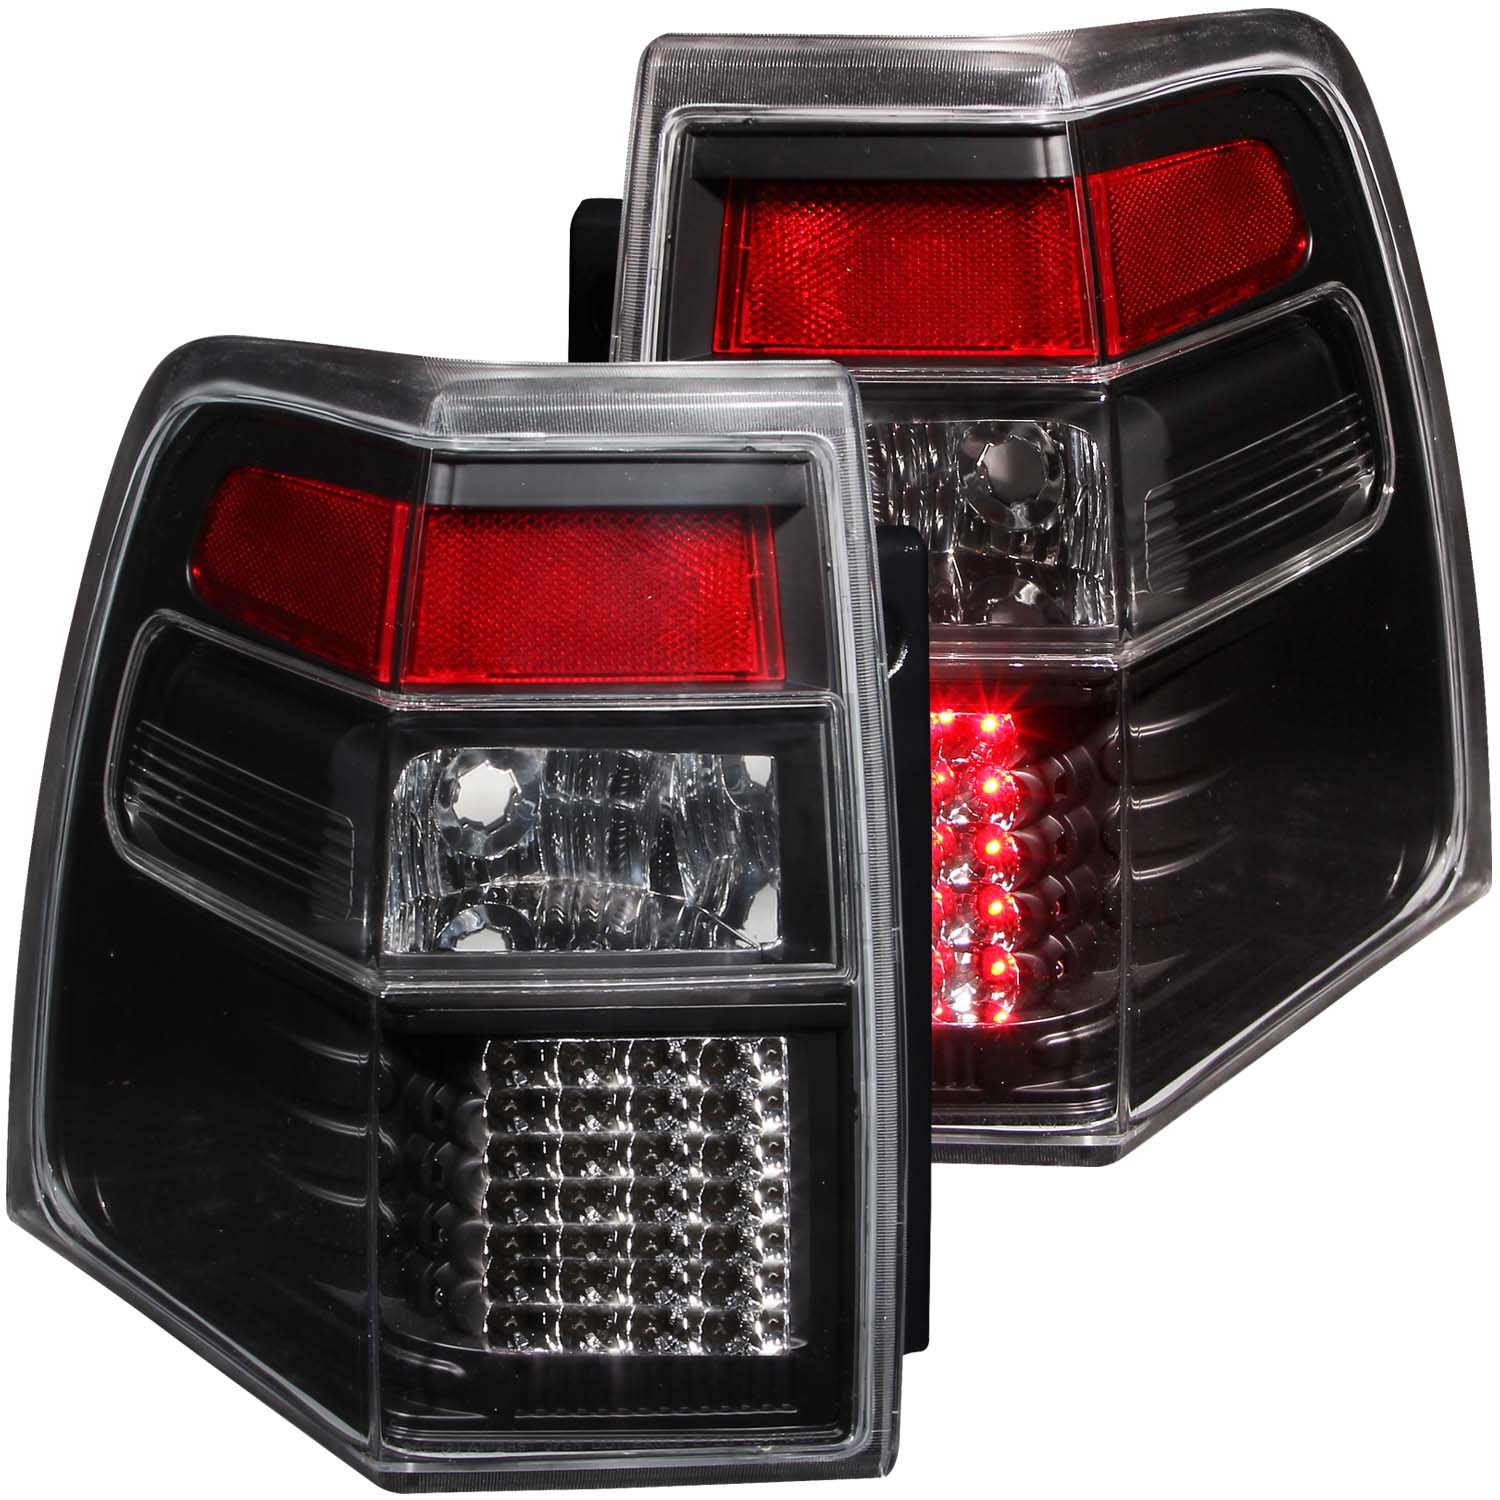 Anzo USA 311110 Tail Light Assembly Fits 07-17 Expedition